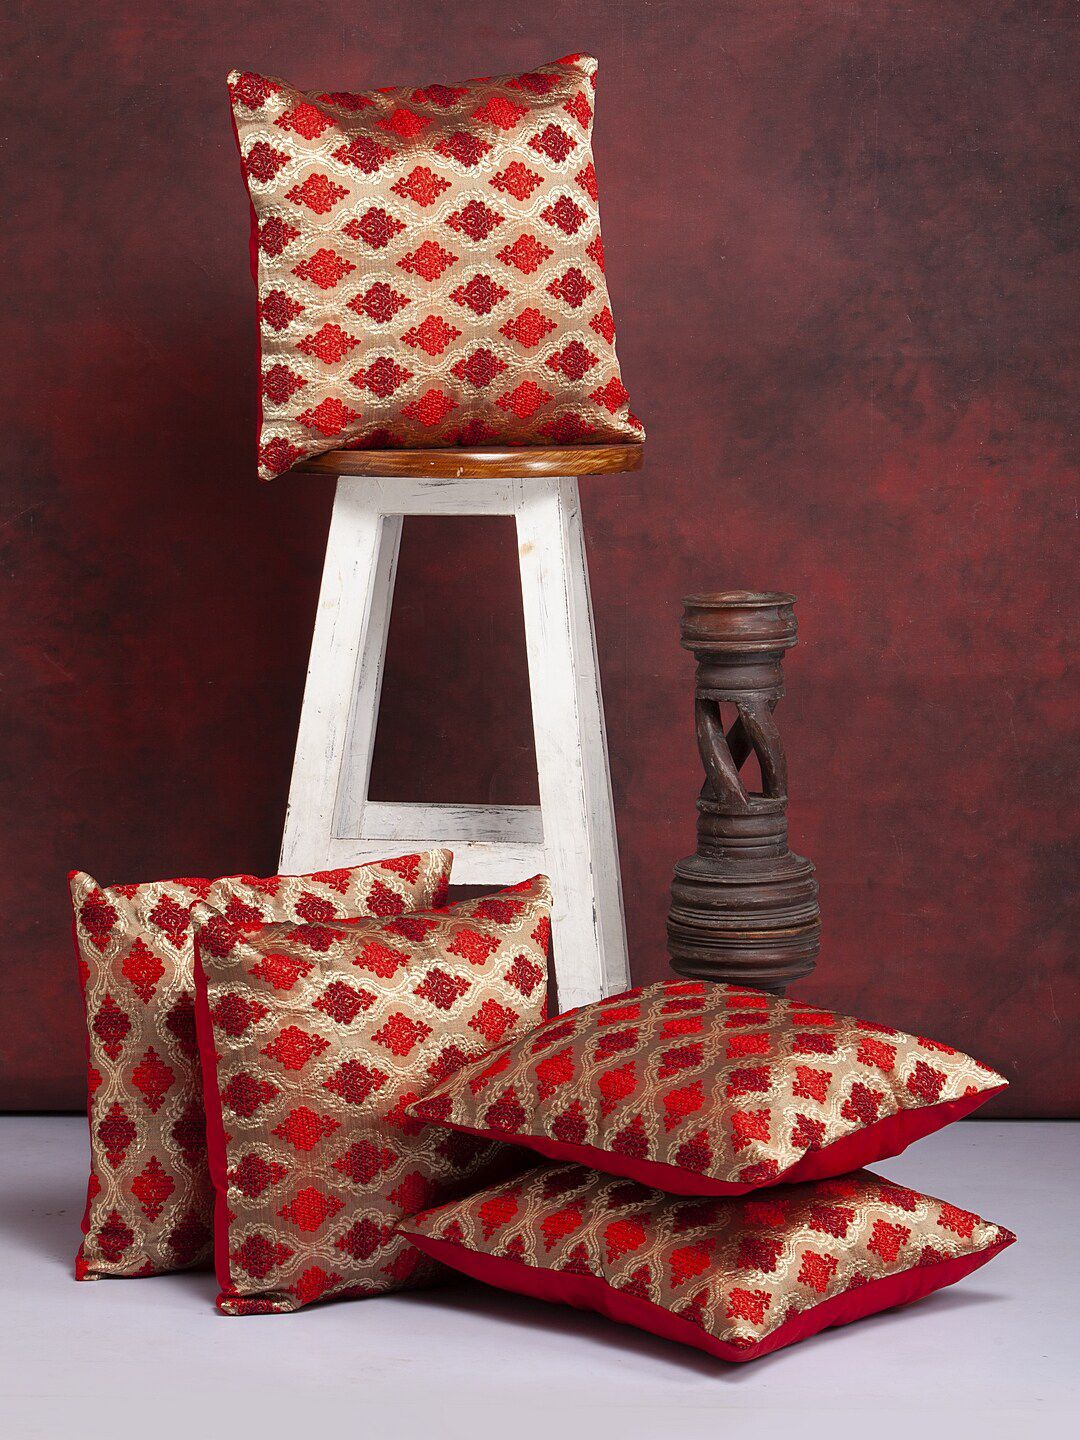 Alina decor Red & Gold-Toned Set of 5 Ethnic Motifs Square Cushion Covers Price in India